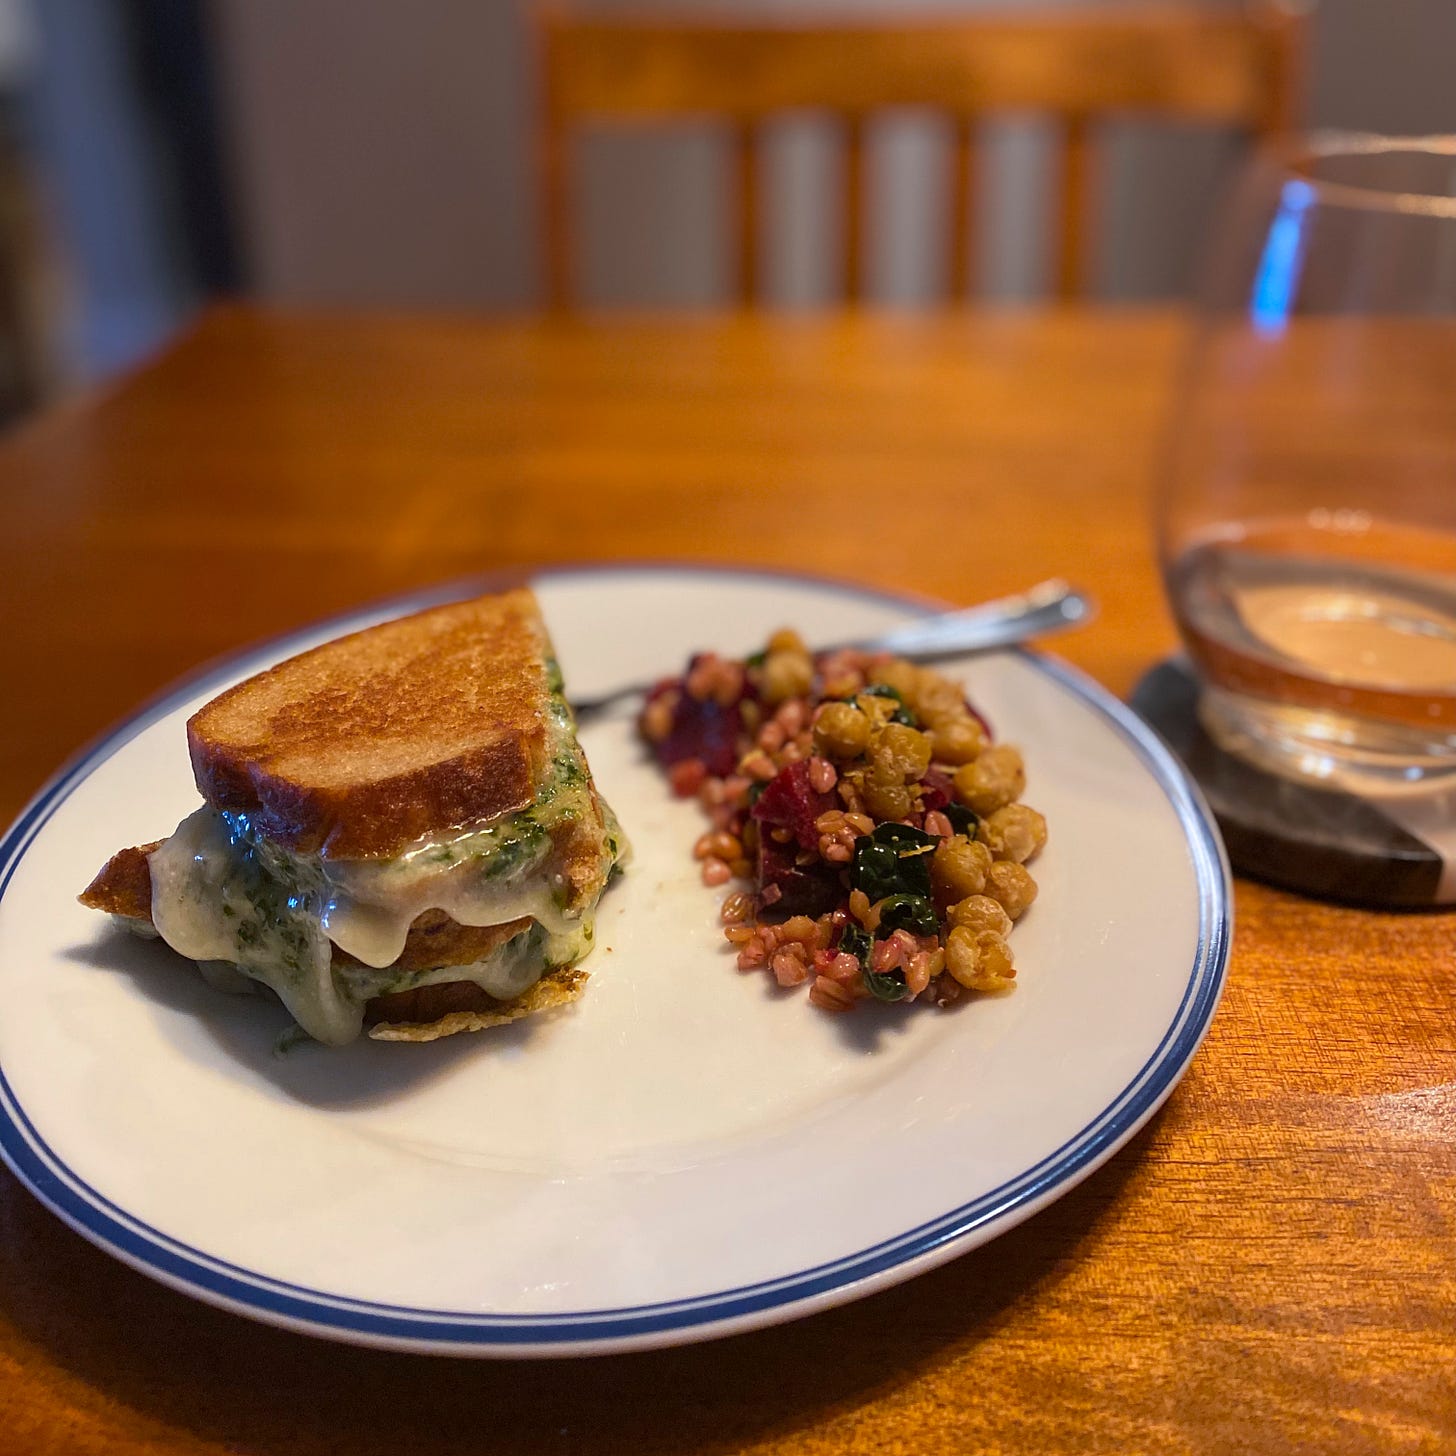 A plate with two halves of a grilled cheese with pesto. Some of the cheese has spilled out at the edge, parts of it browned and crisp. Next to the sandwich is a small pile of the farro salad described above, and there is a glass of rosé wine on the coaster next to the plate.